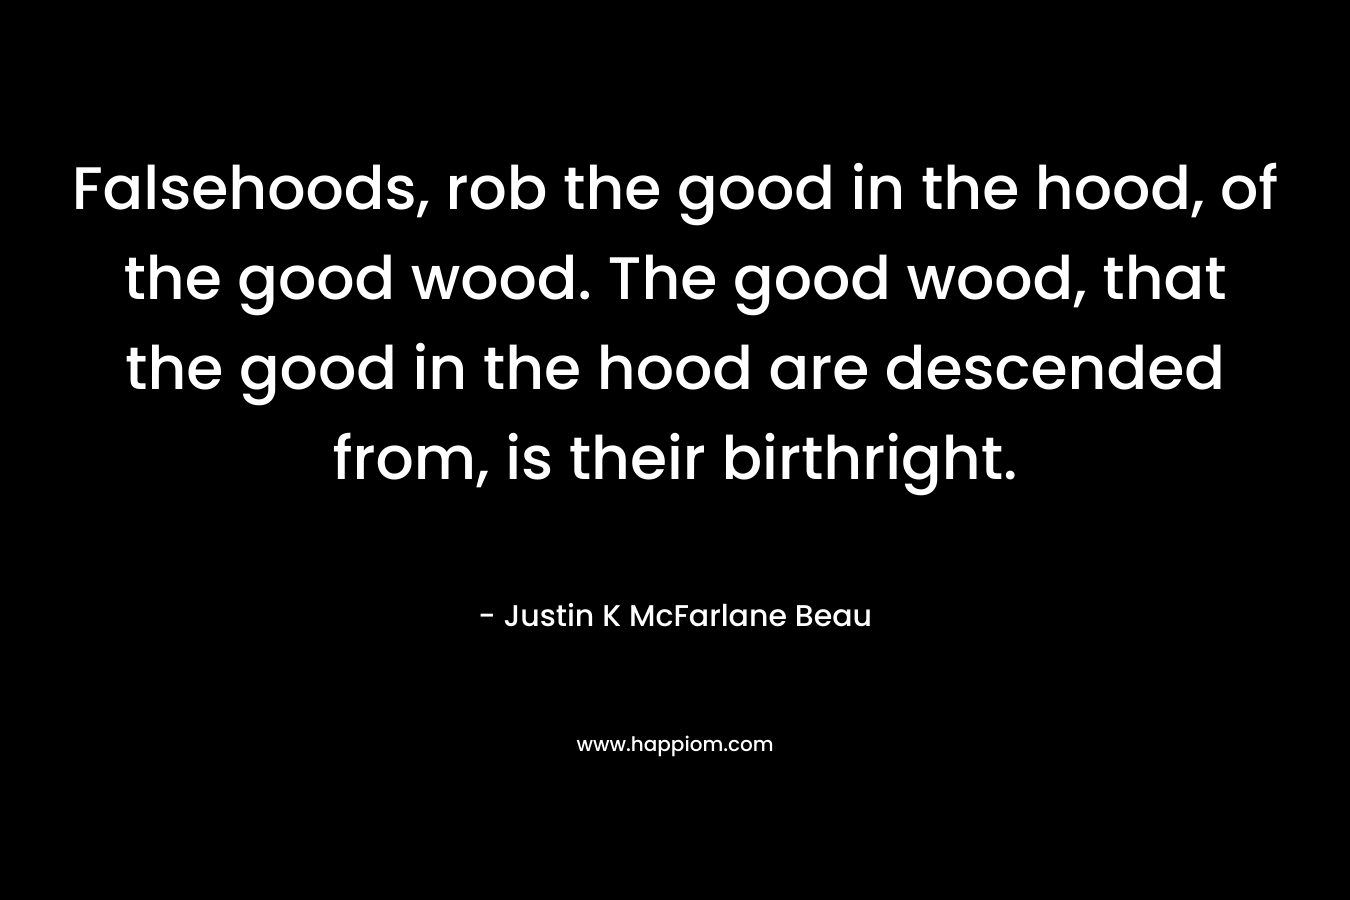 Falsehoods, rob the good in the hood, of the good wood. The good wood, that the good in the hood are descended from, is their birthright.